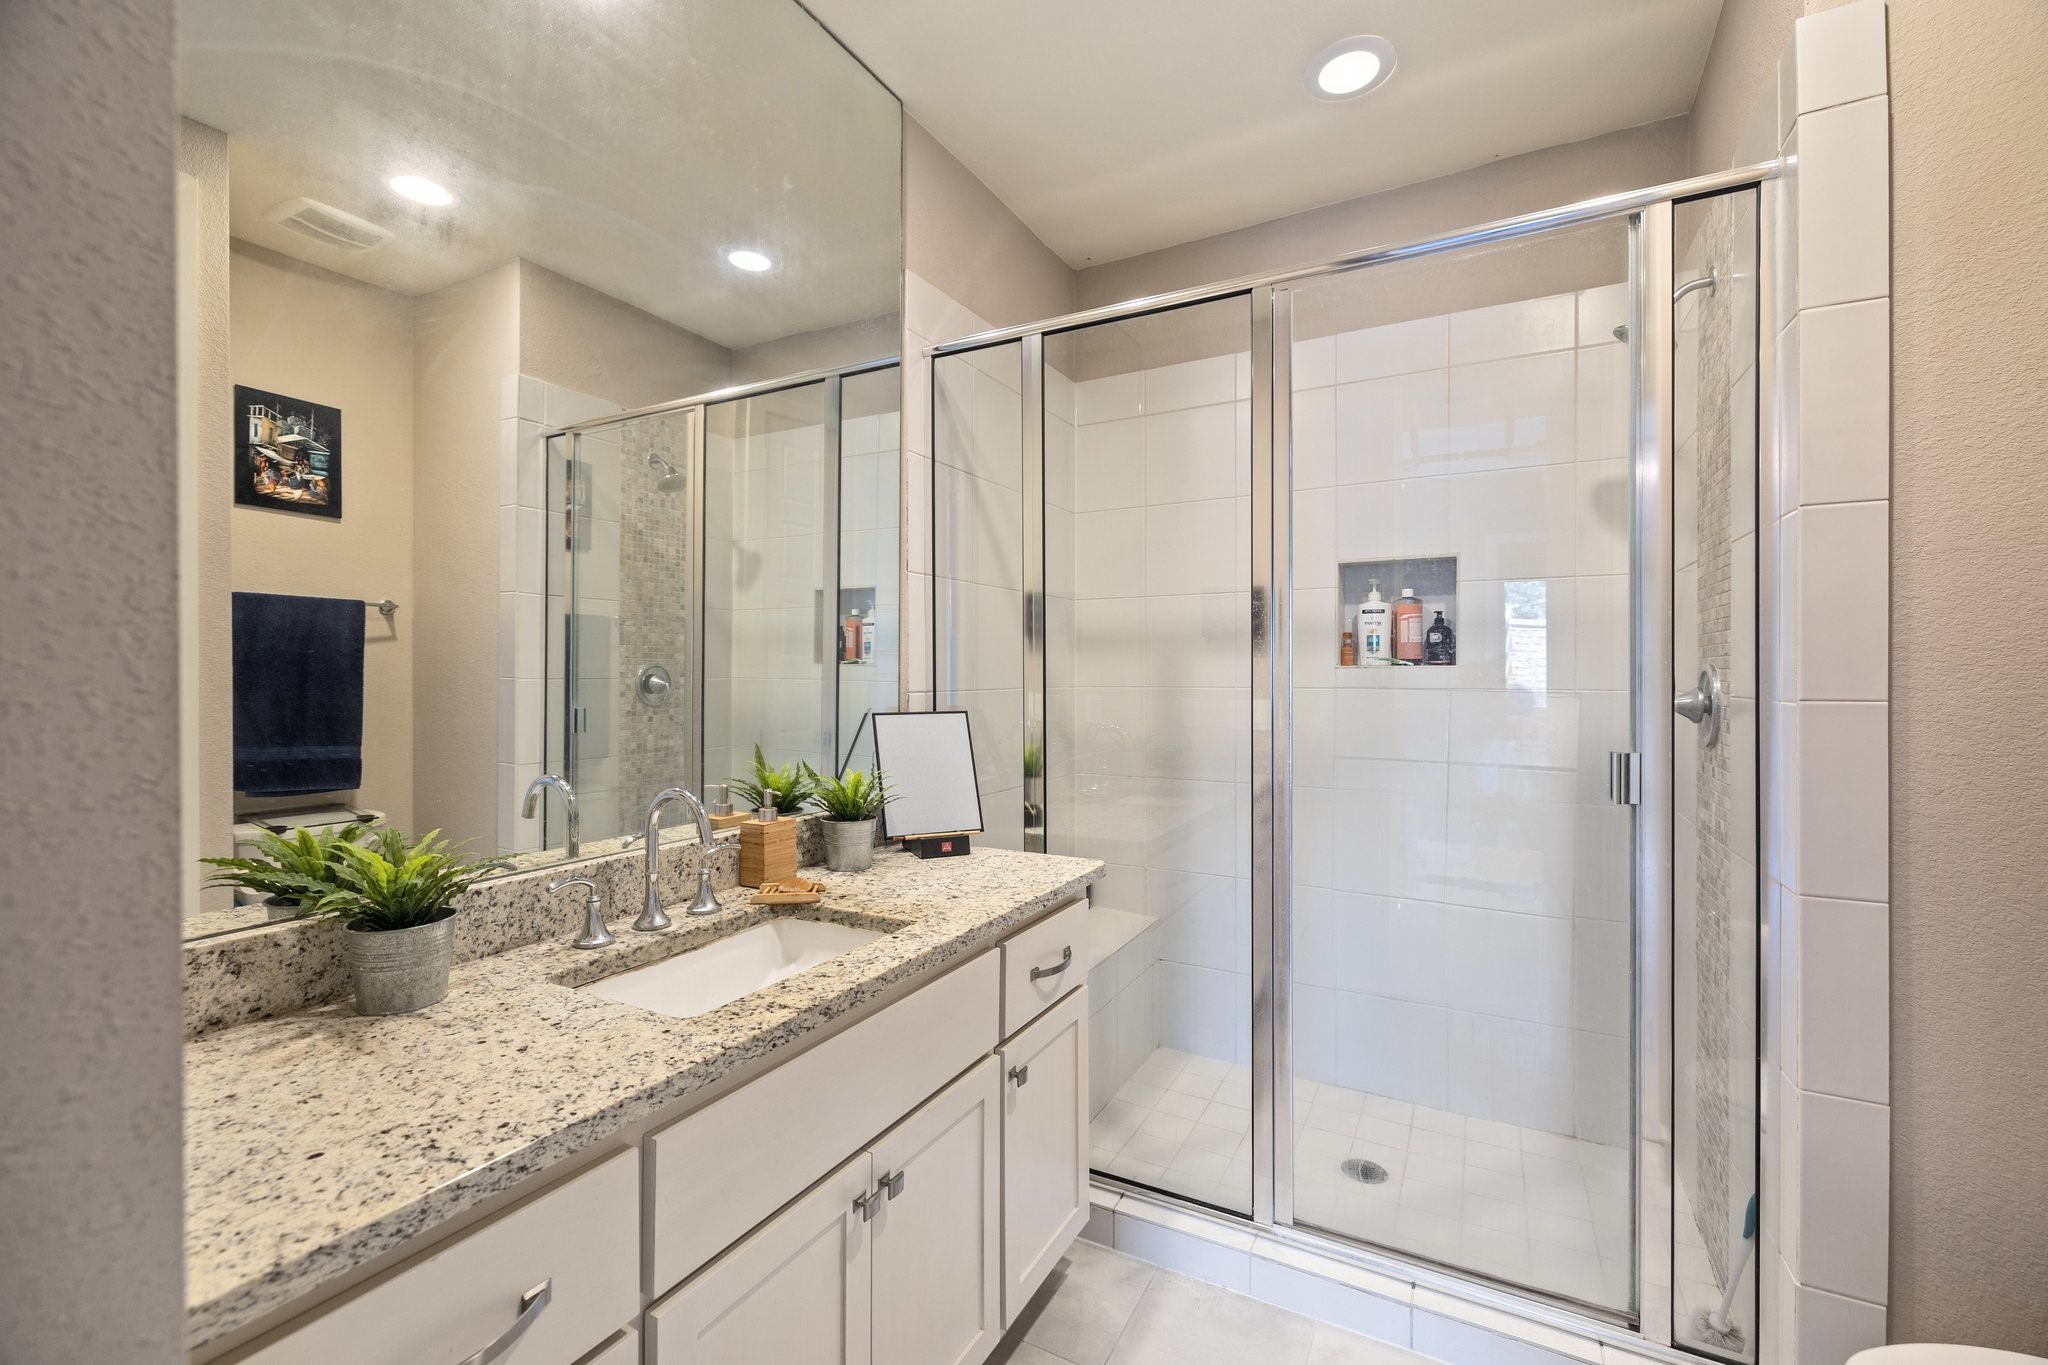 Secondary bathroom with tile accents/flooring, large mirrors and walk-in shower.